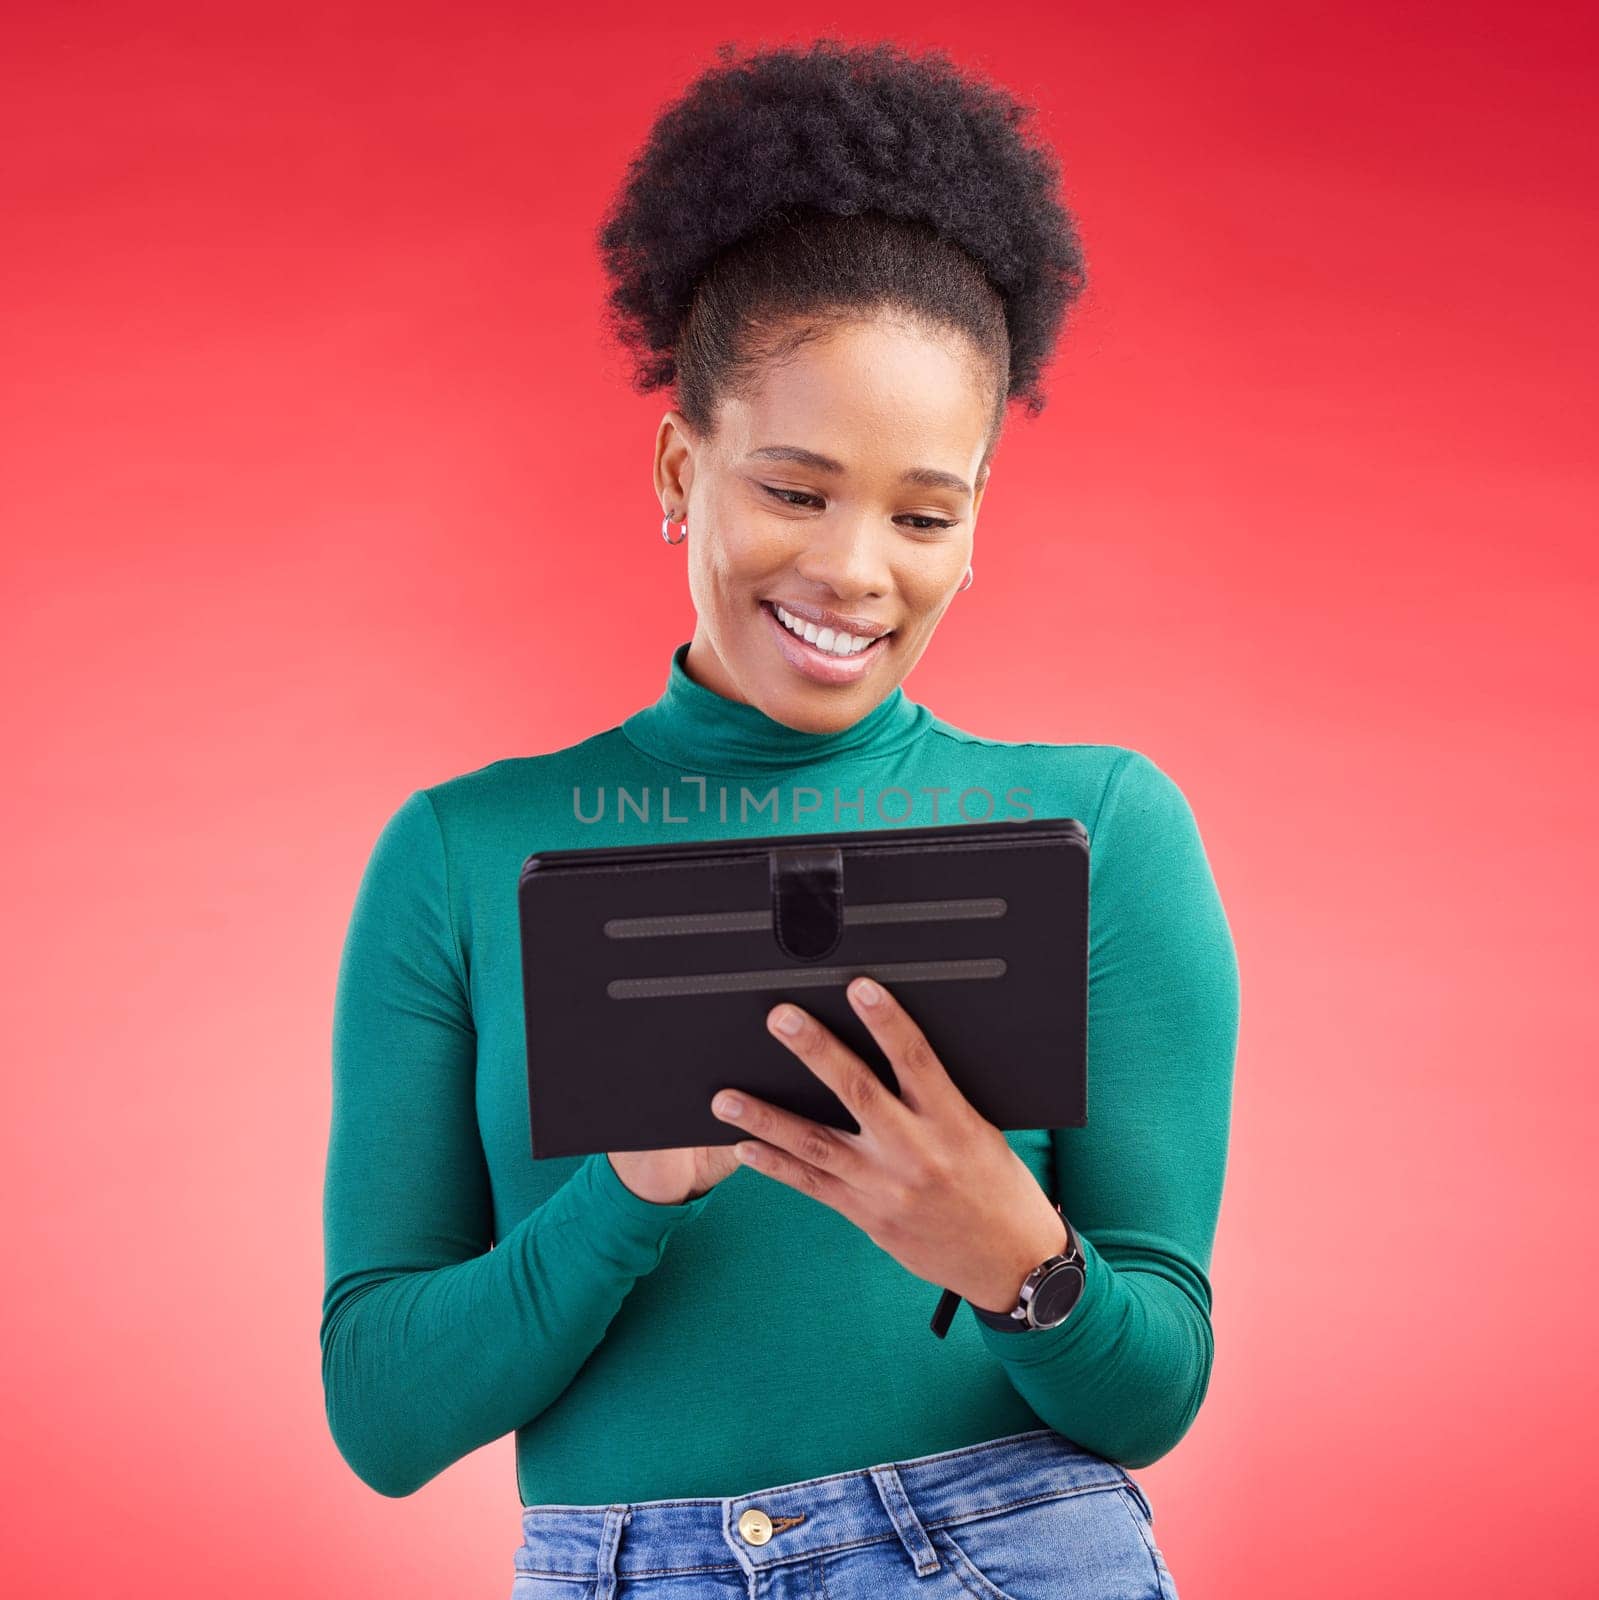 Happy woman, tablet and research for social media or communication against a red studio background. African female person on technology for online browsing, networking or streaming entertainment.